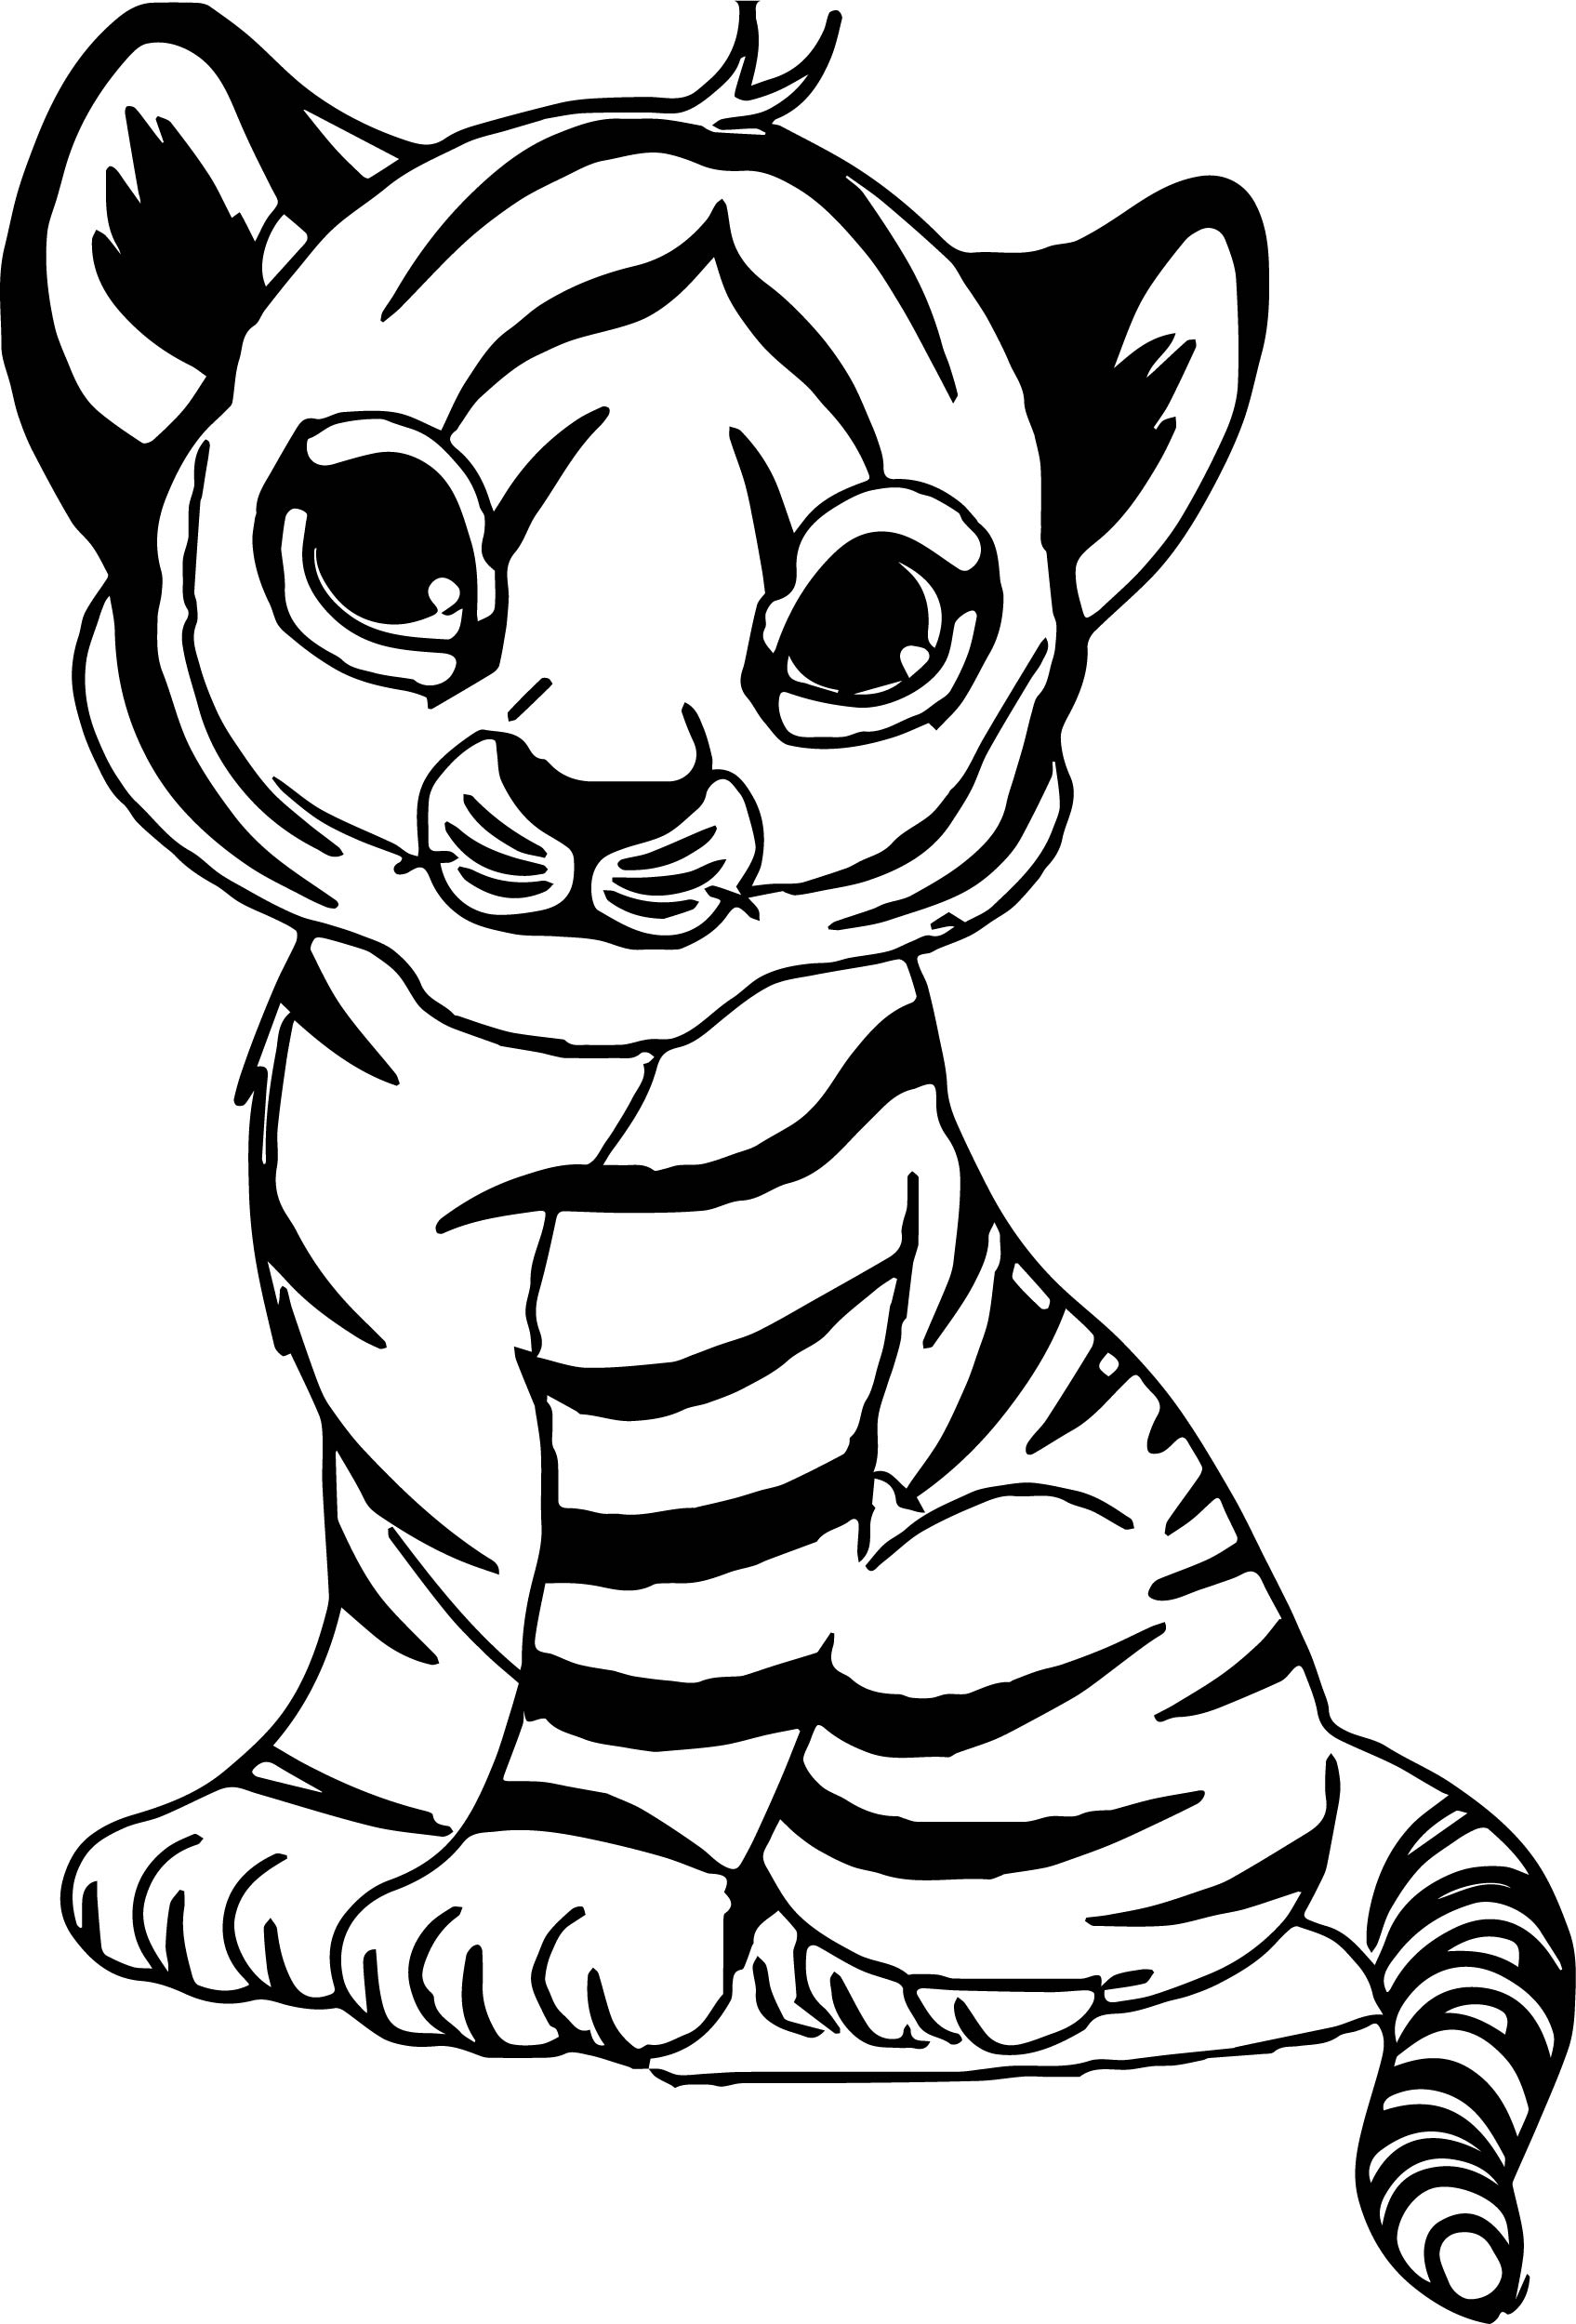 Tiger Coloring Pages - Free Printable Coloring Pages at ColoringOnly.com